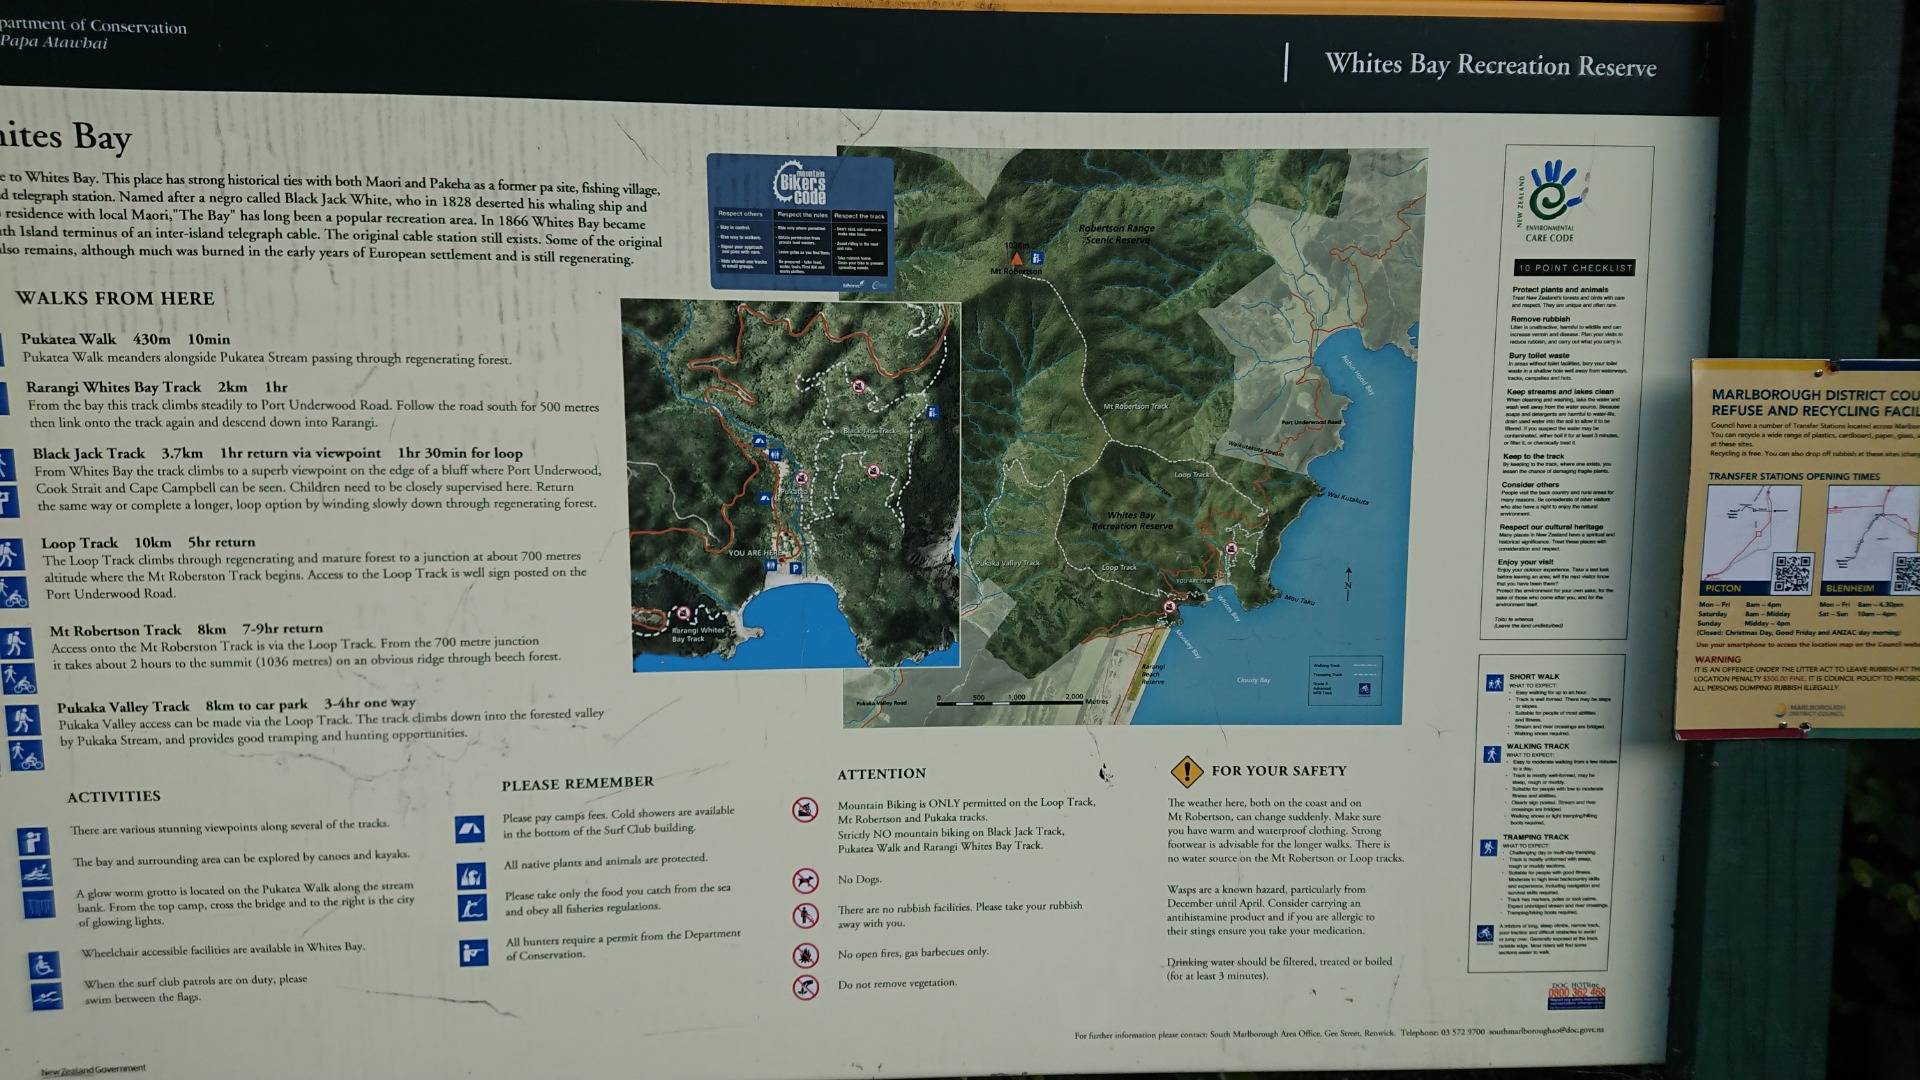 The information board at Whites Bay gives a few hiking options...